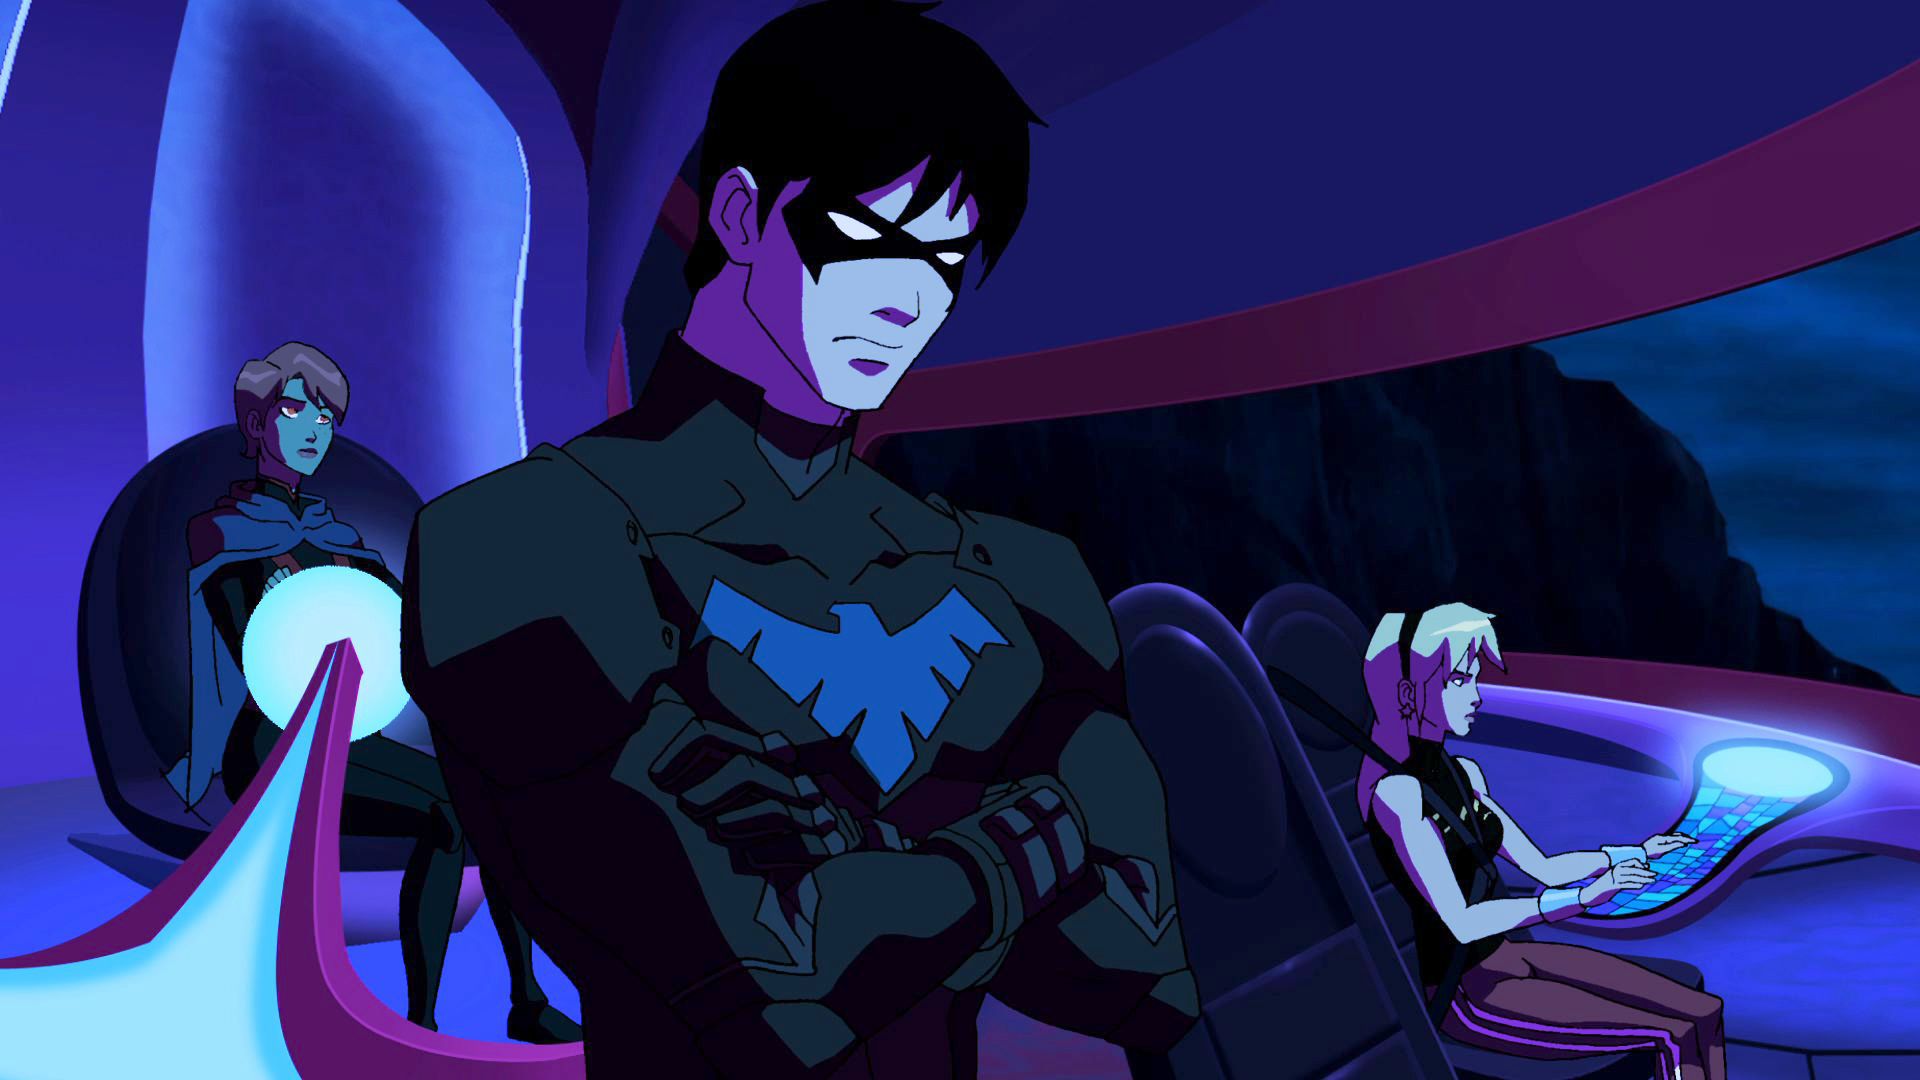 PRODUCERS TALK ABOUT WHAT'S NEXT FOR YOUNG JUSTICE